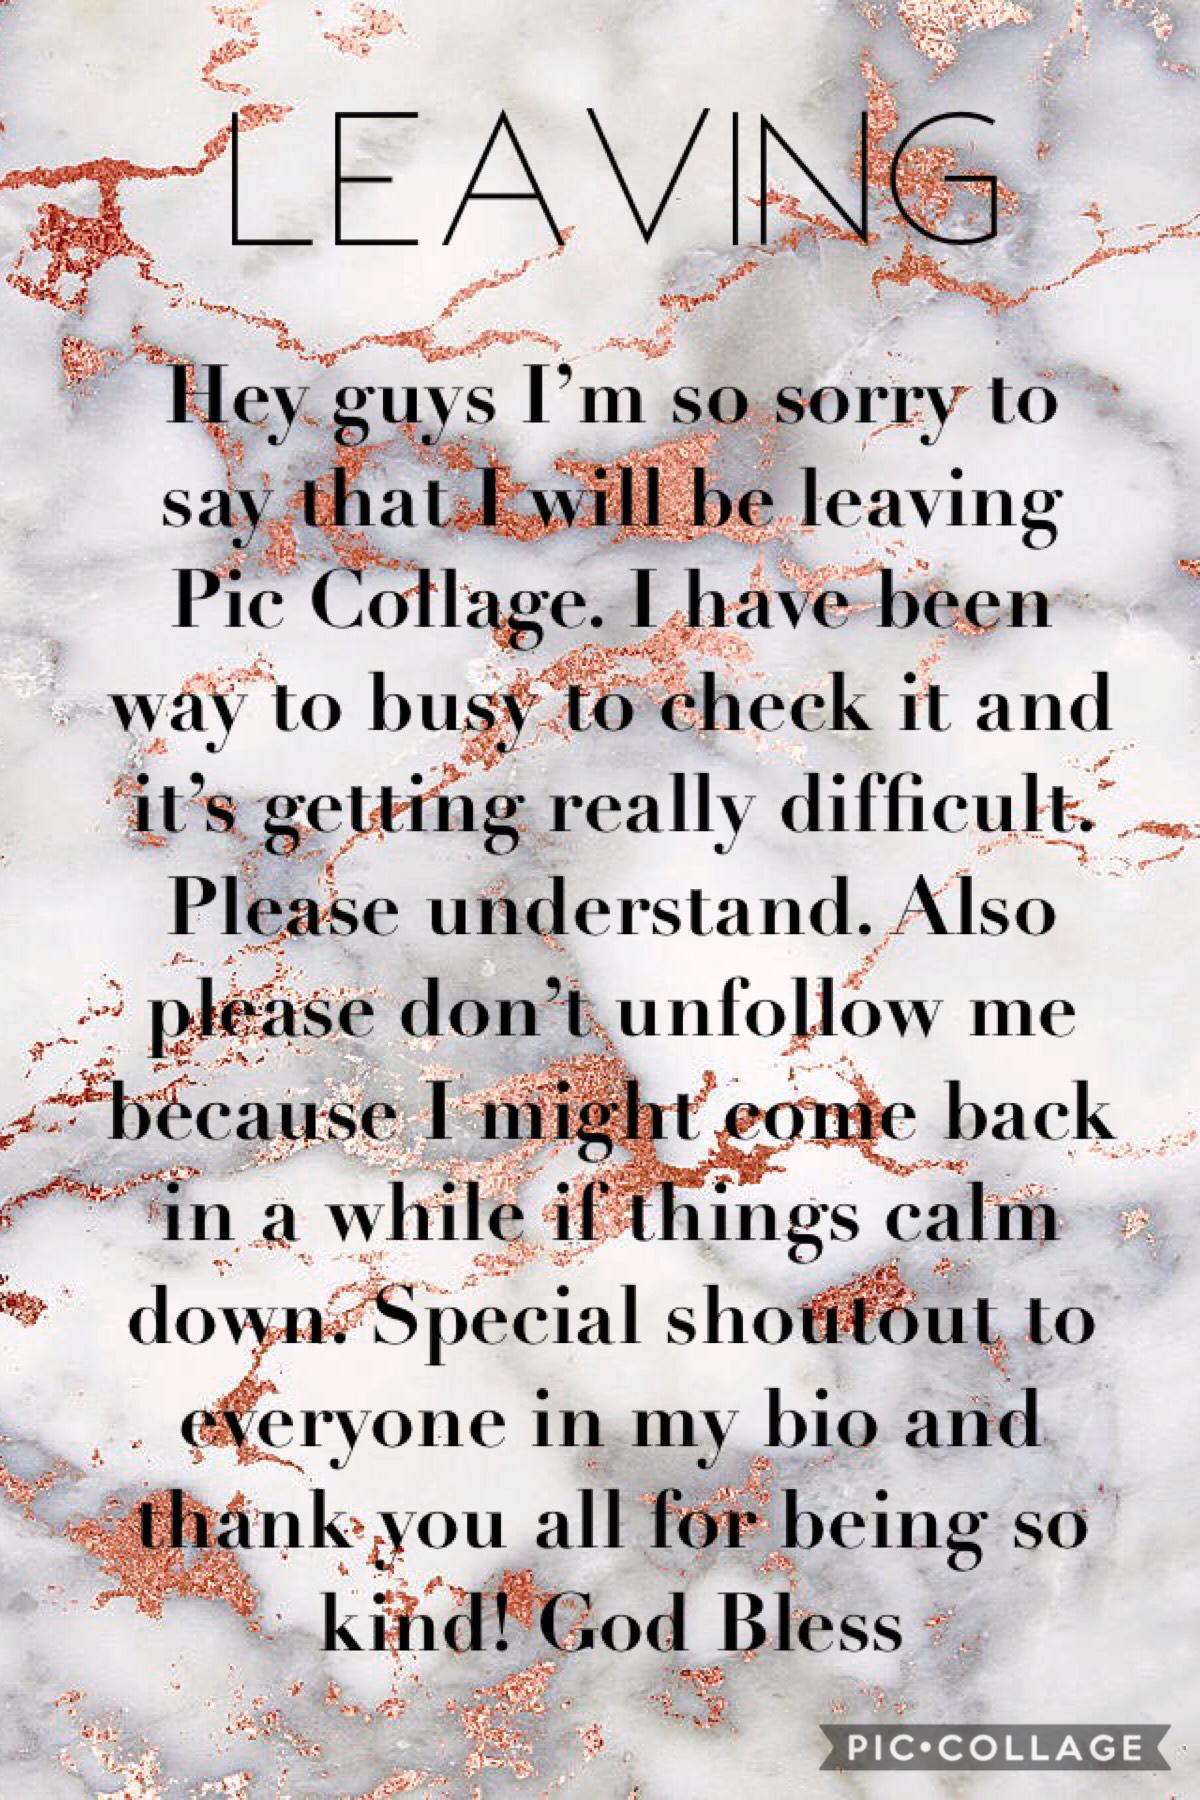 Please Tap
I’m so sorry you guys. I haven’t been active and I’m really sorry and will sincerely miss all of you. I seriously will